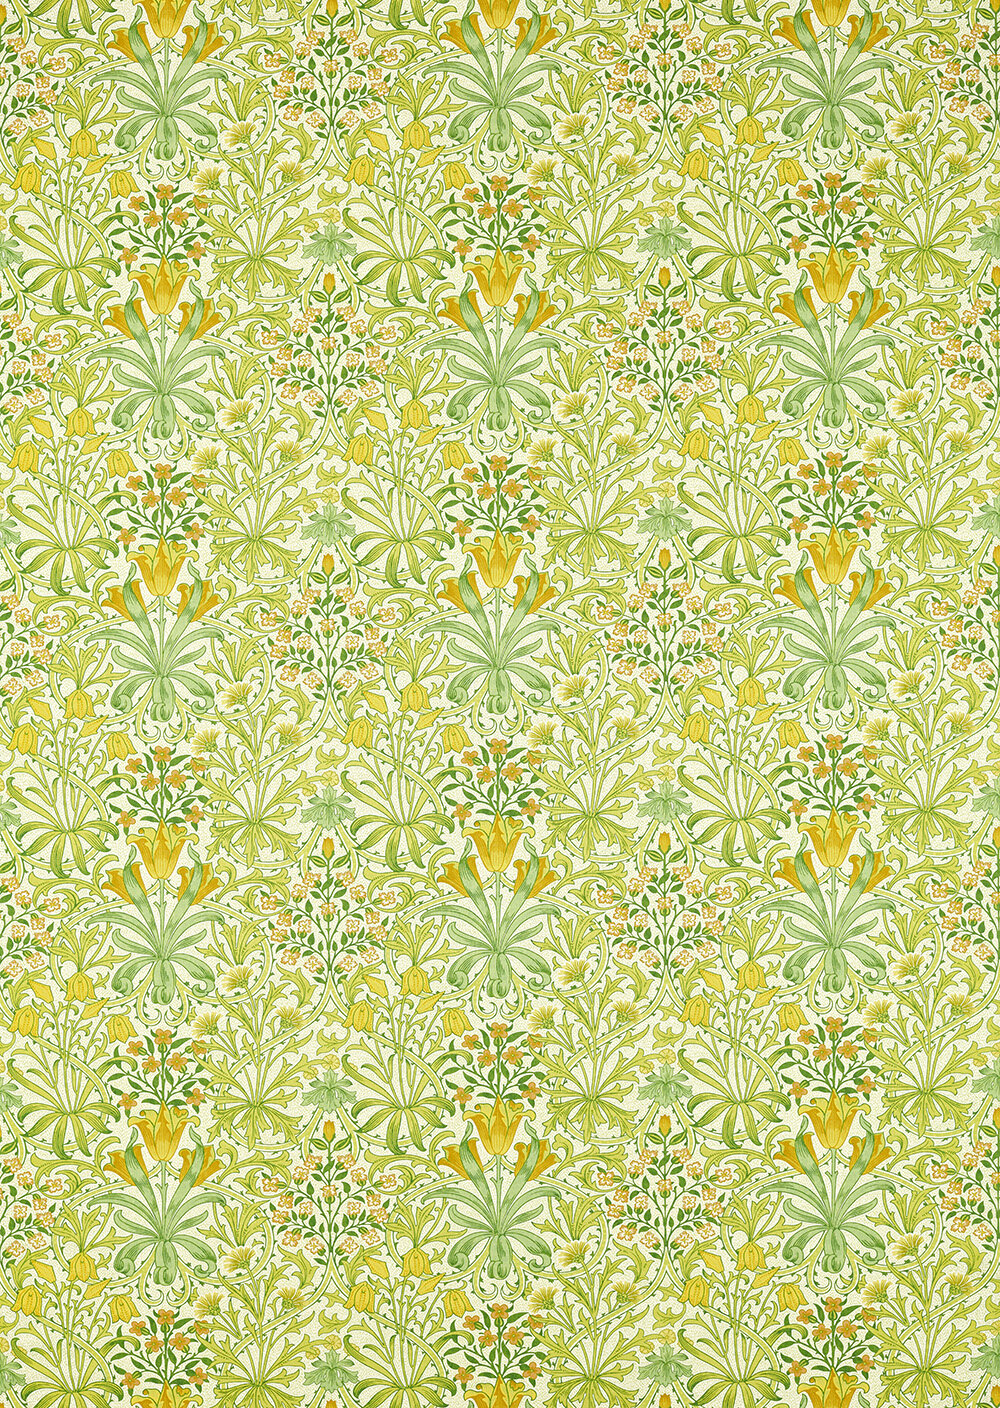 Woodland Weeds  Fabric - Sap Green - by Morris